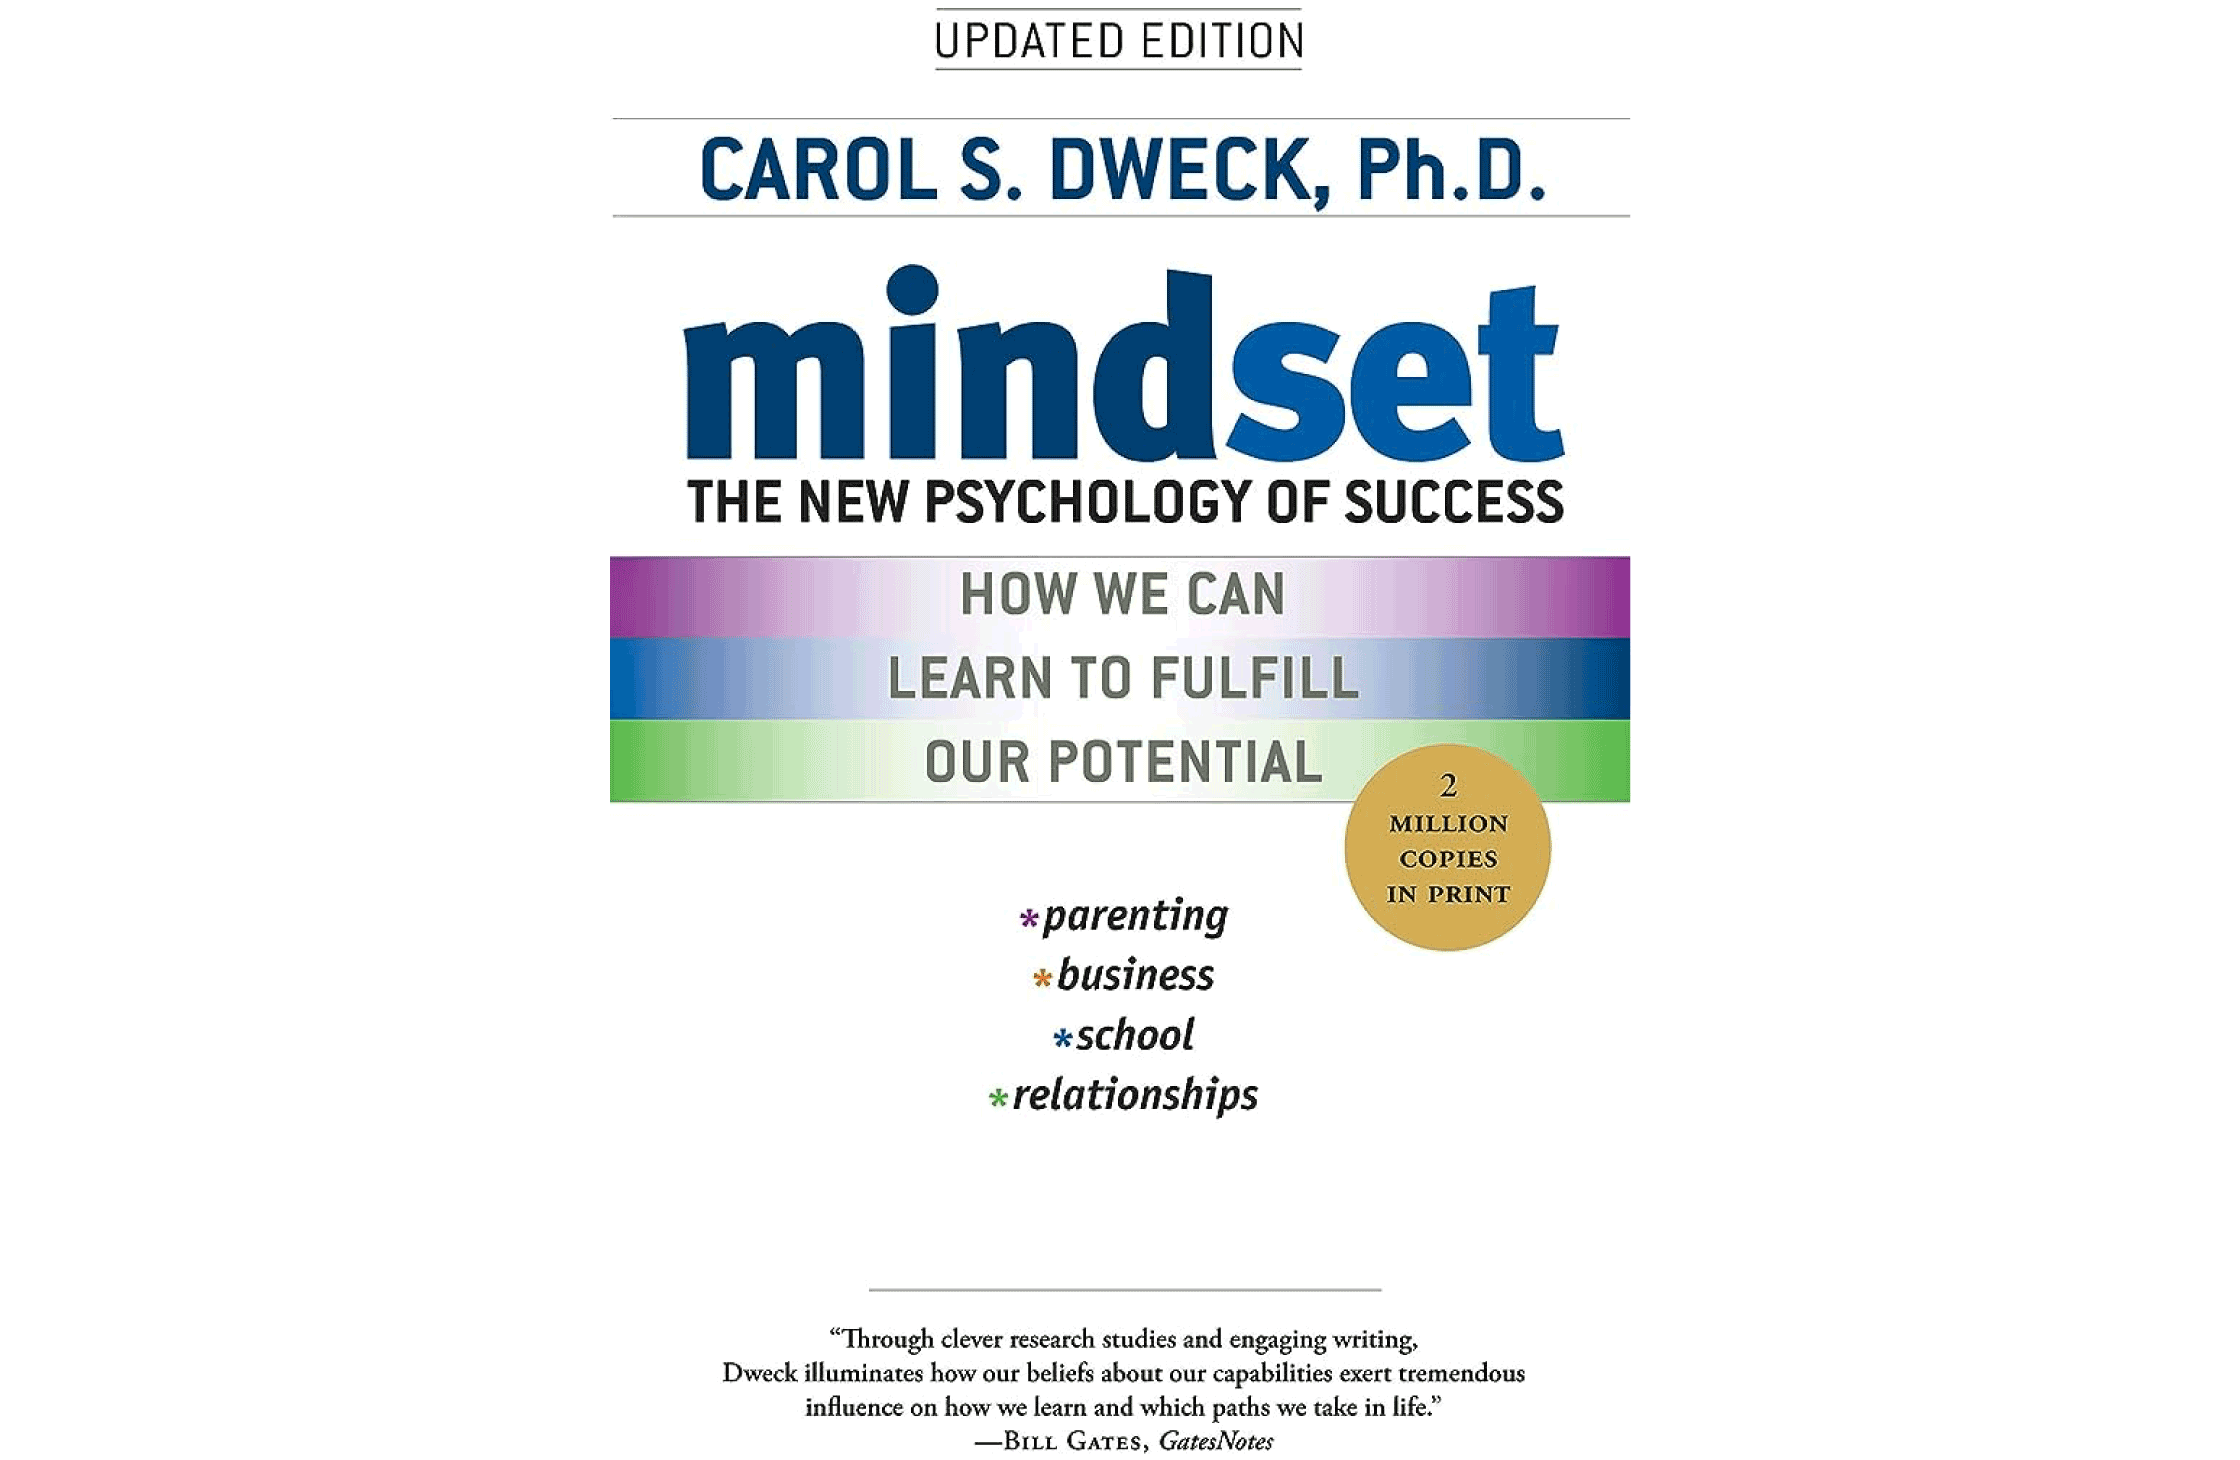 Summary: Mindset: The New Psychology of Success by Carol S. Dweck